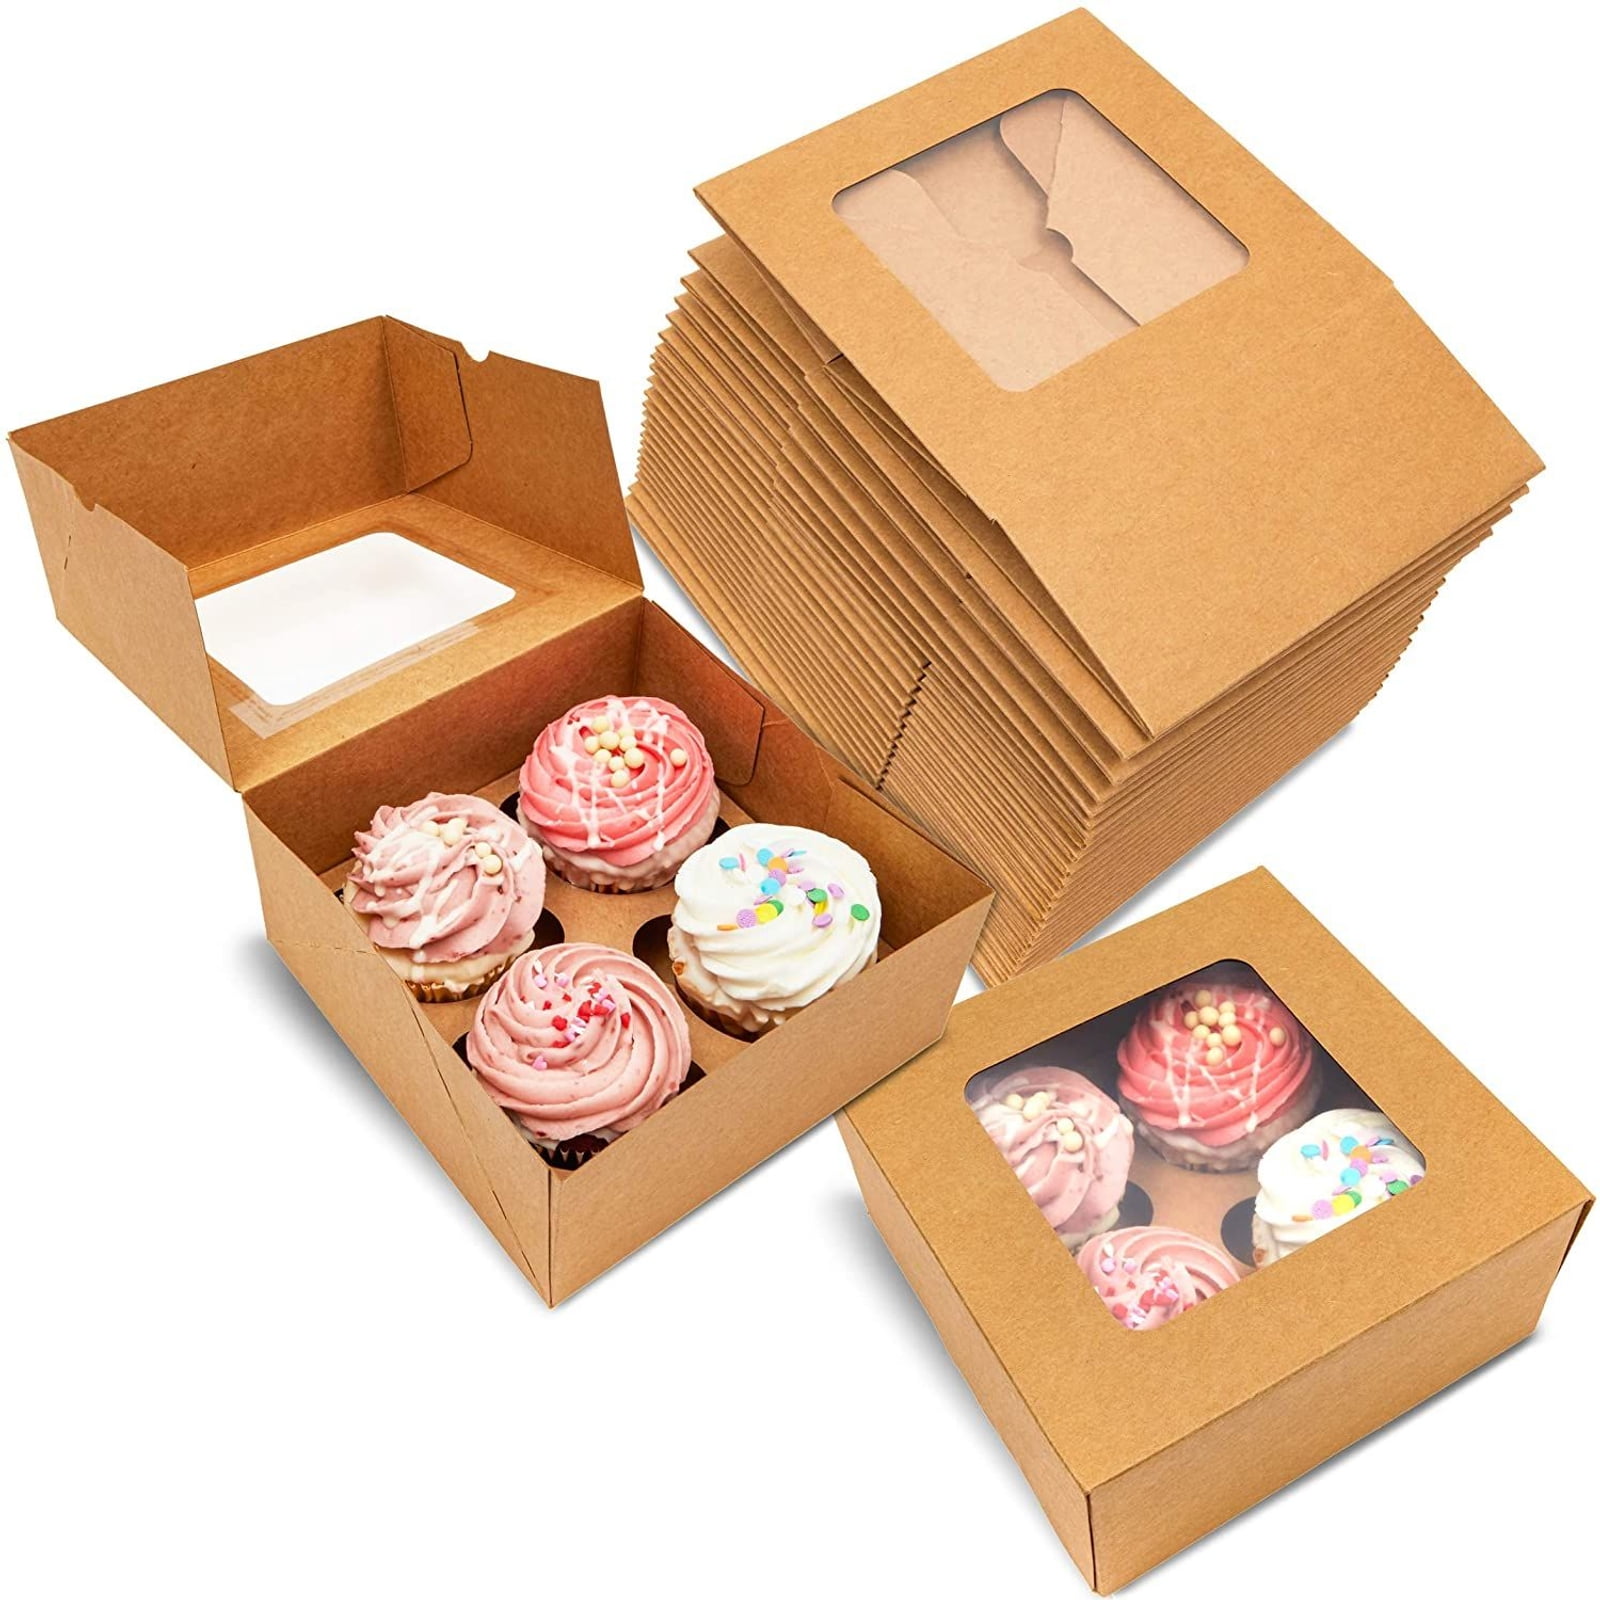 6 4 2 12 & 24 Cup Cakes Removable Inserts White Cupcake Boxes Holds 1